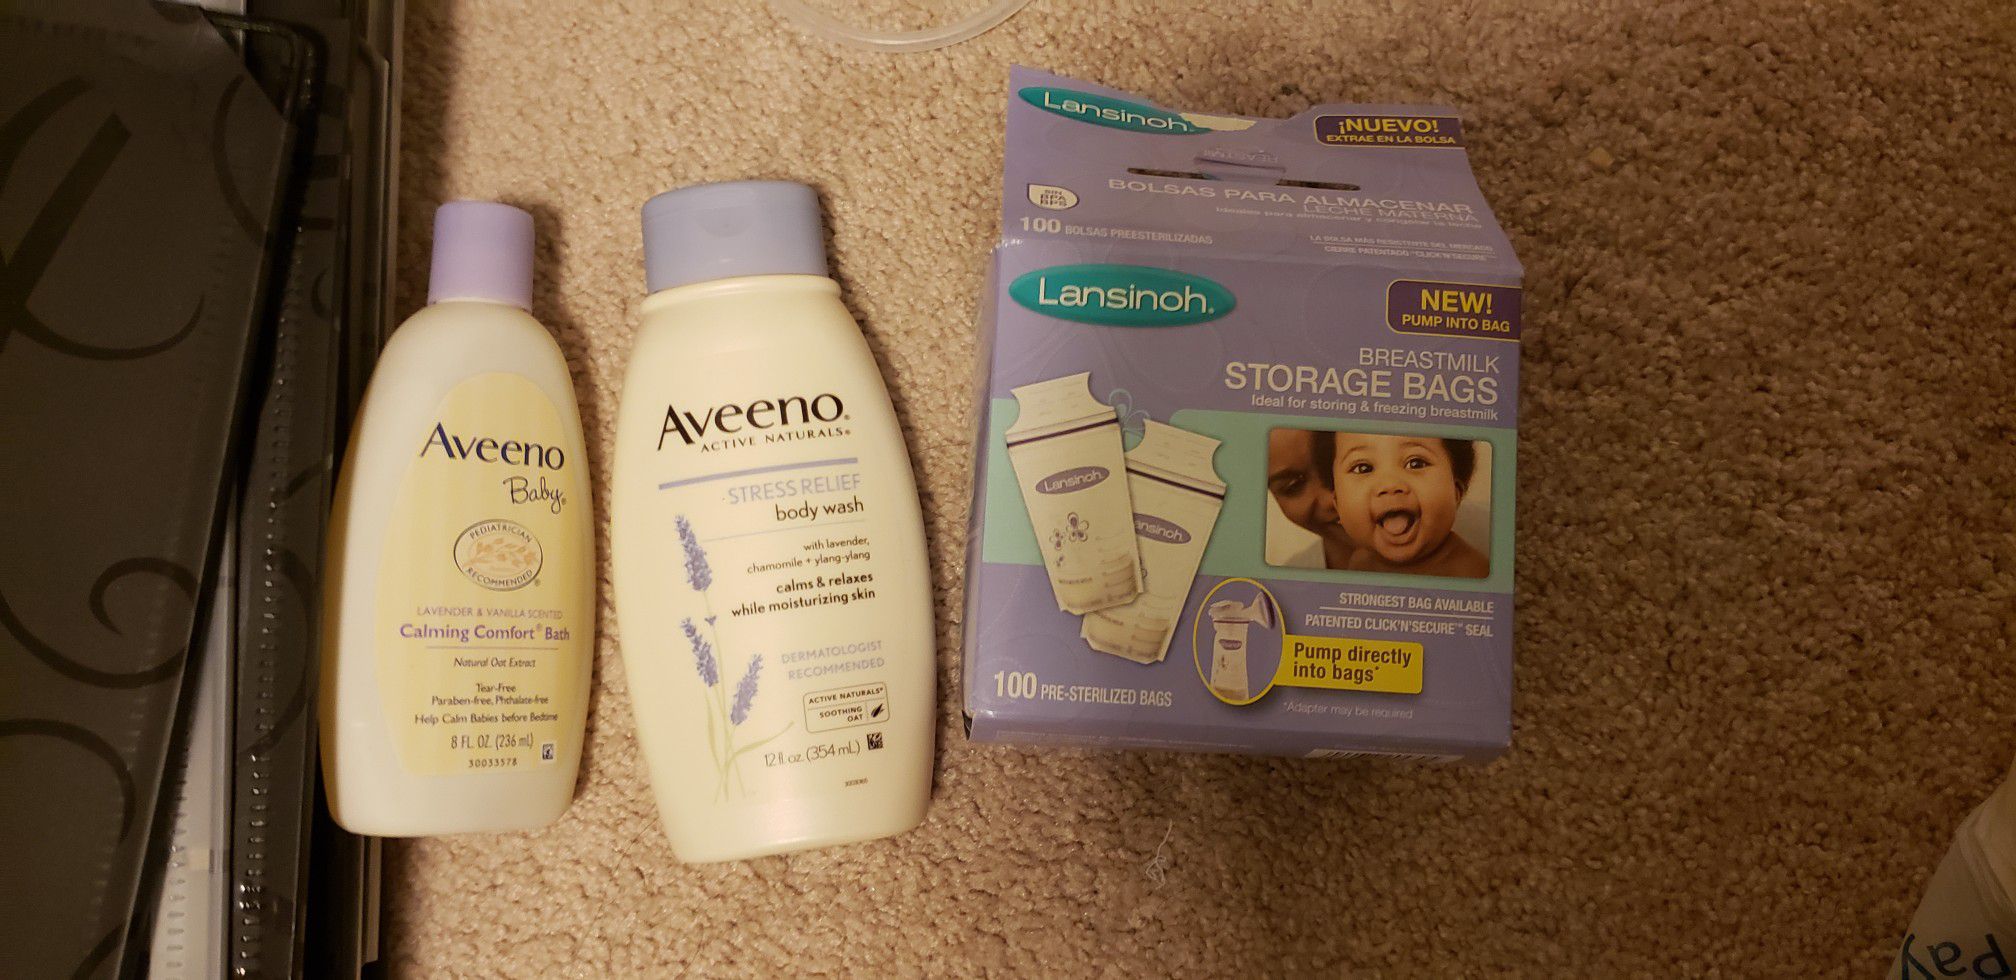 Aveeno baby products and lansinoh storage bags